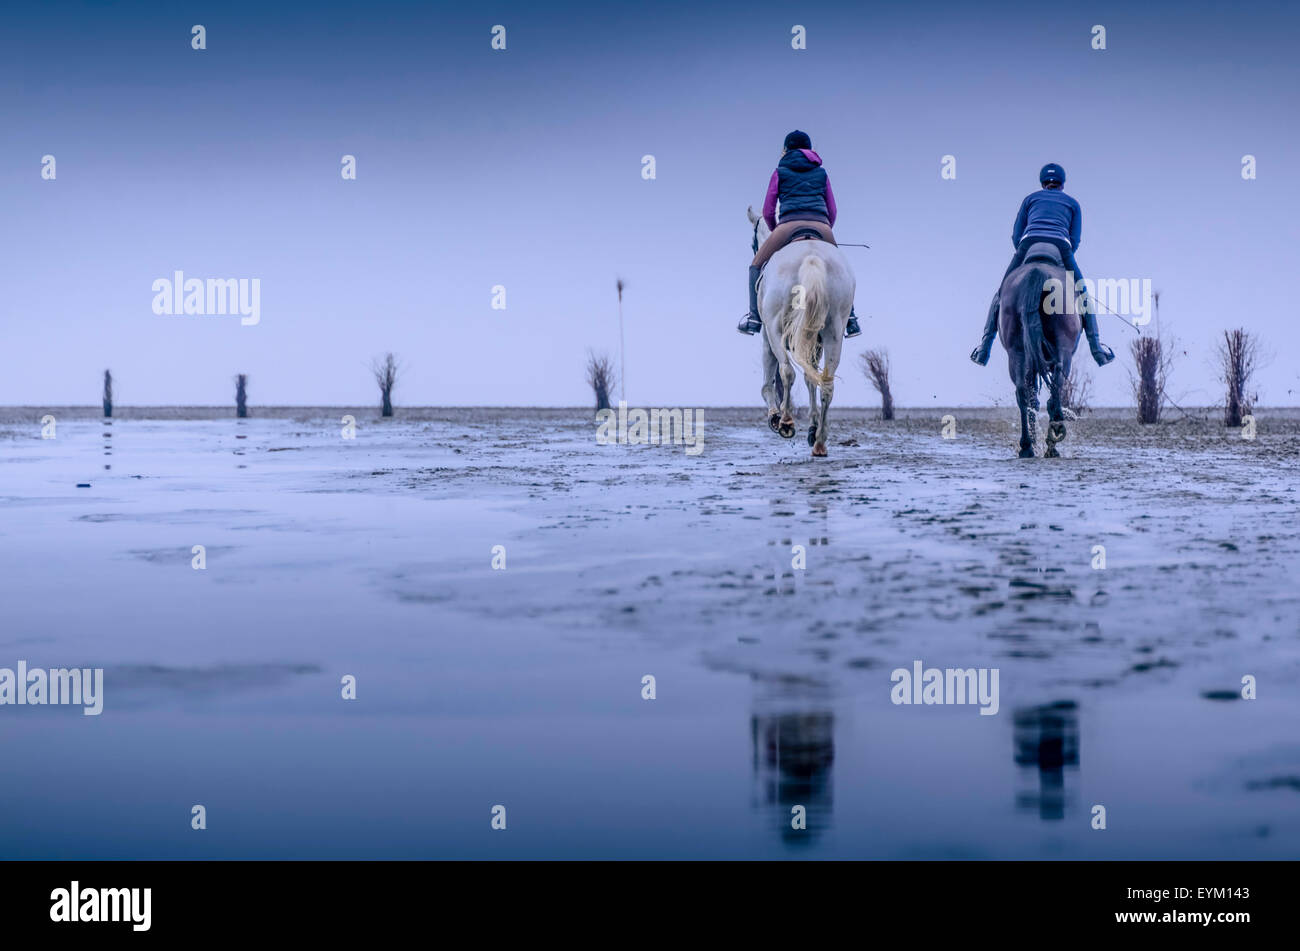 Germany, low things, new plant, Cuxhaven, wadden sea, mud flats, woman, horse, Stock Photo